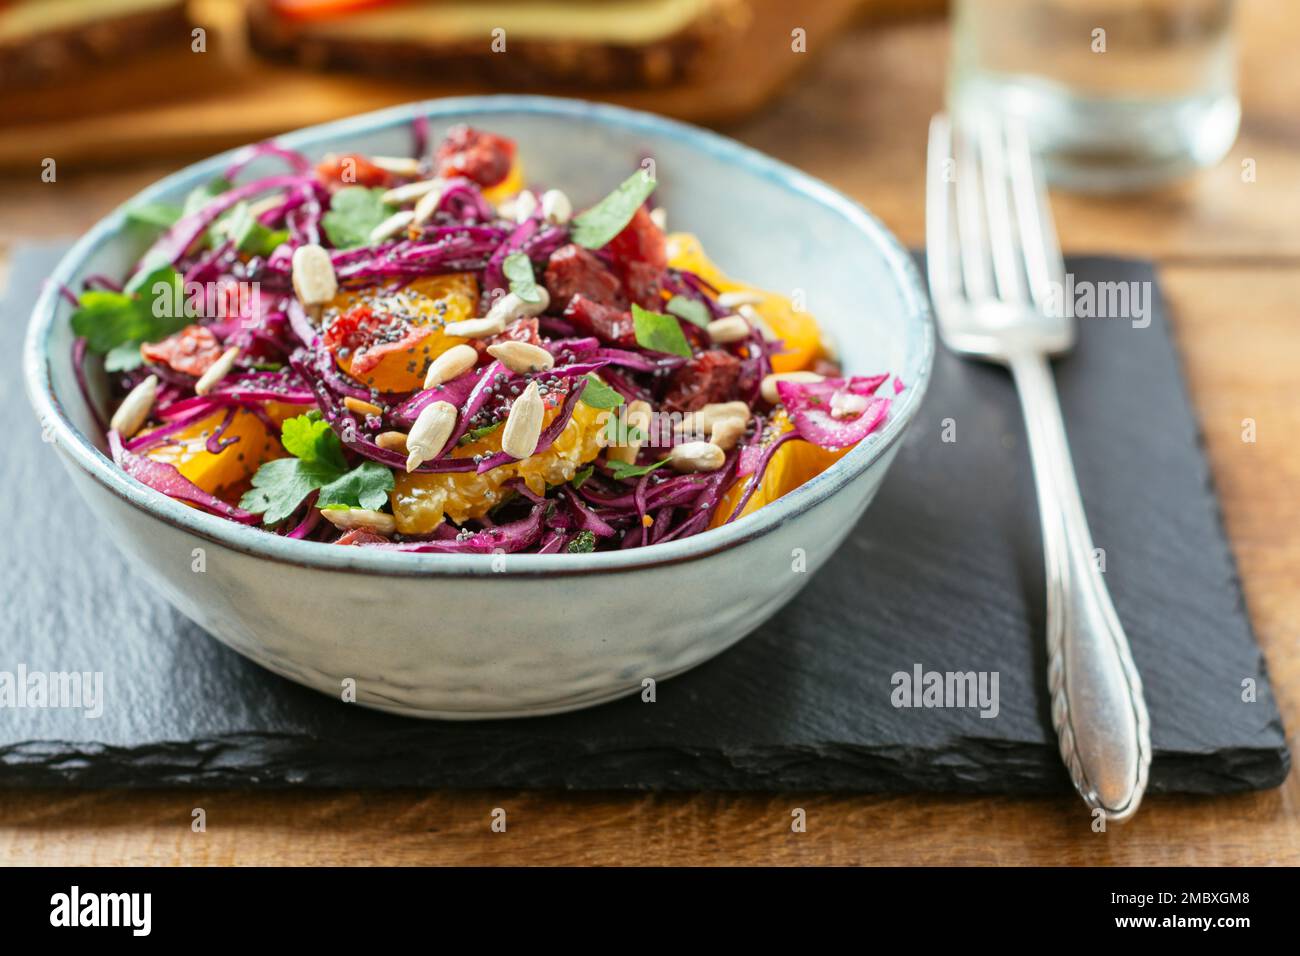 Bowl with a home made red cabbage slaw with mandarin oranges. Stock Photo